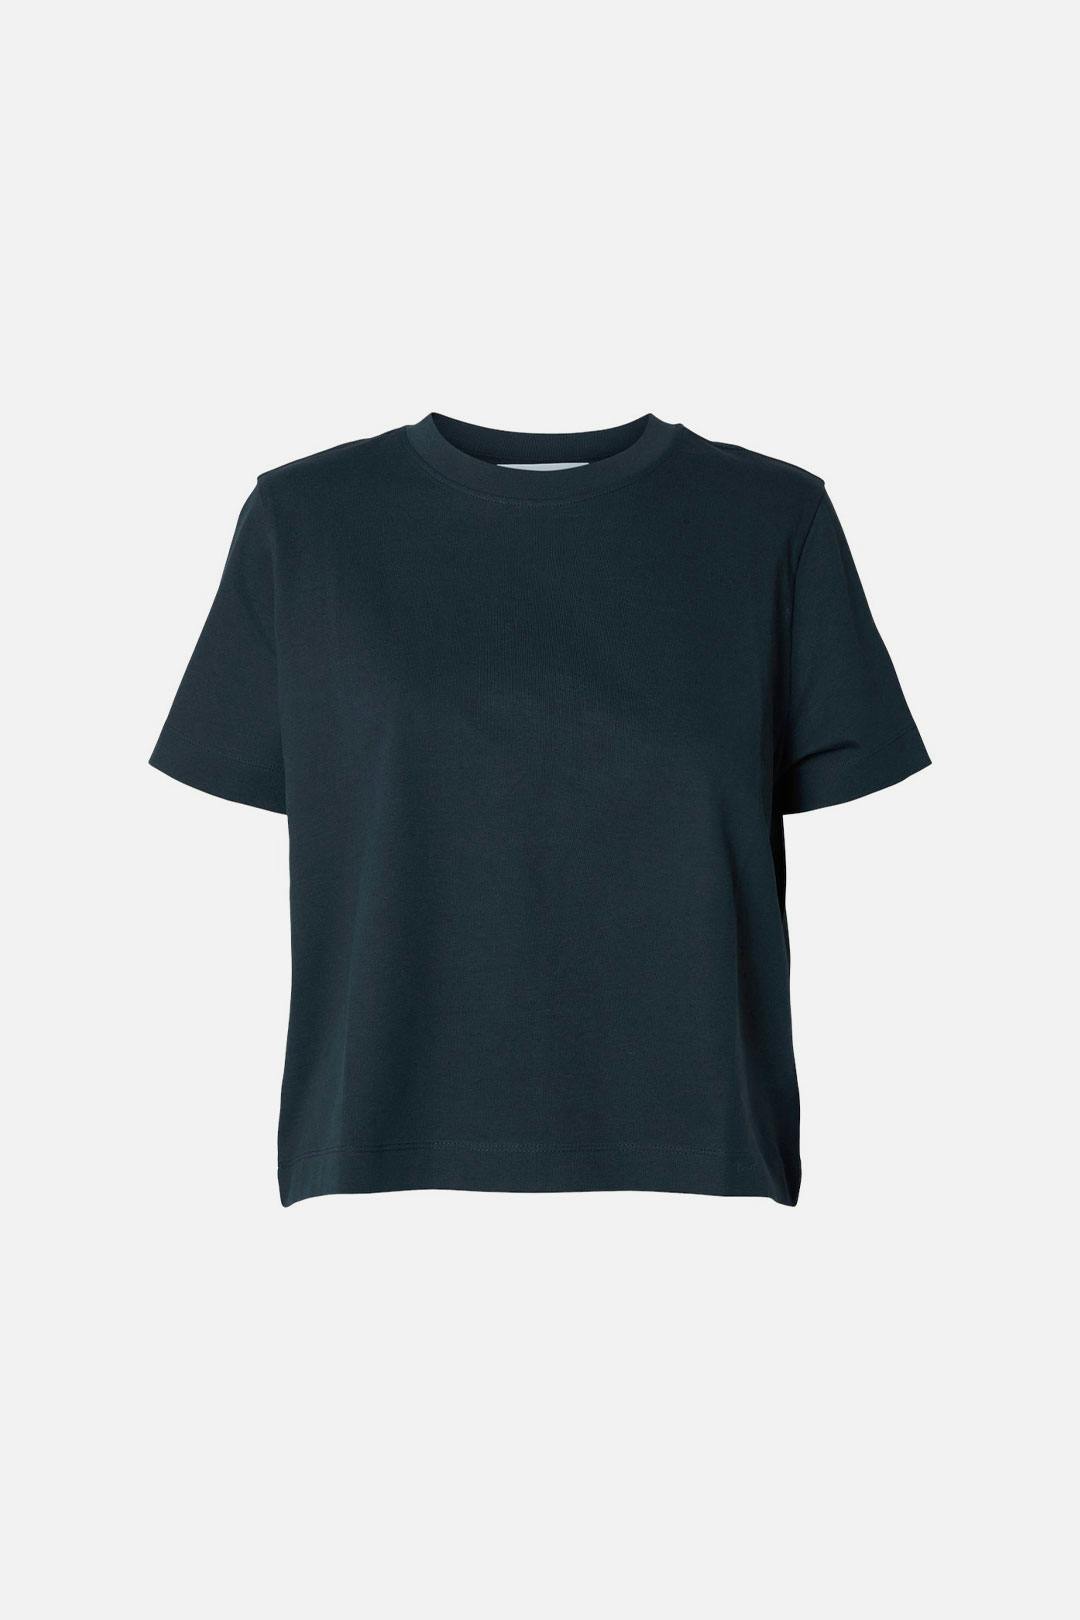 Essential ss boxy tee